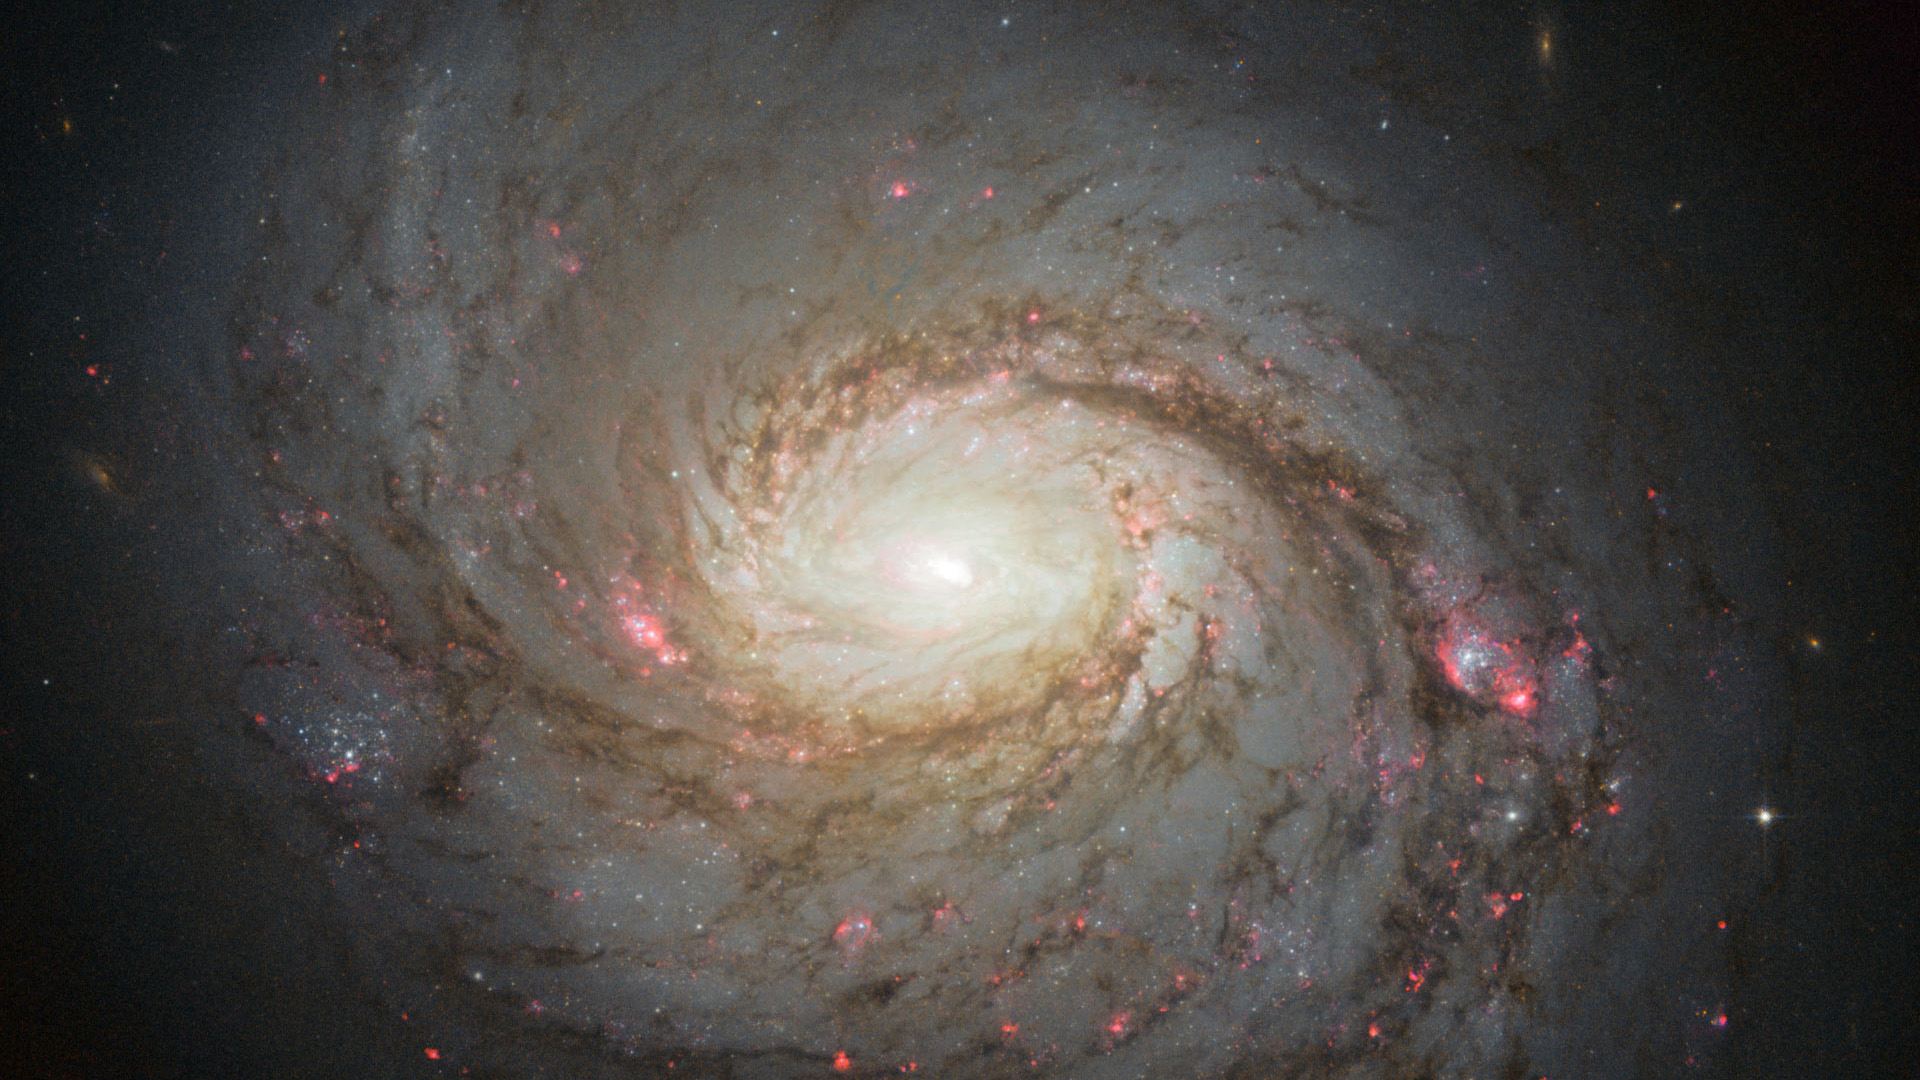 Hubble image of spiral galaxy NGC 1068